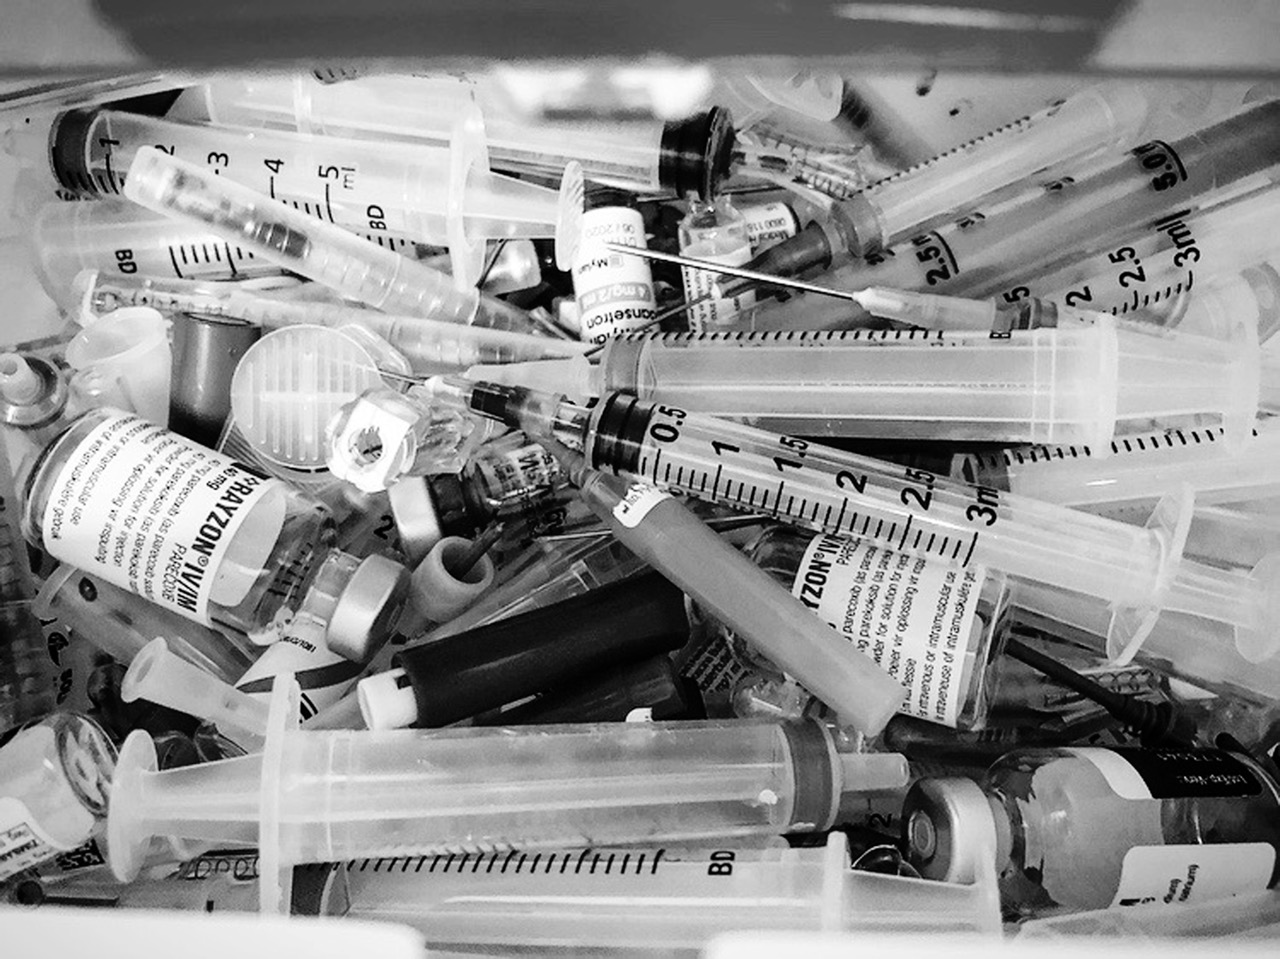 A black and white photo of a pile of syringes.